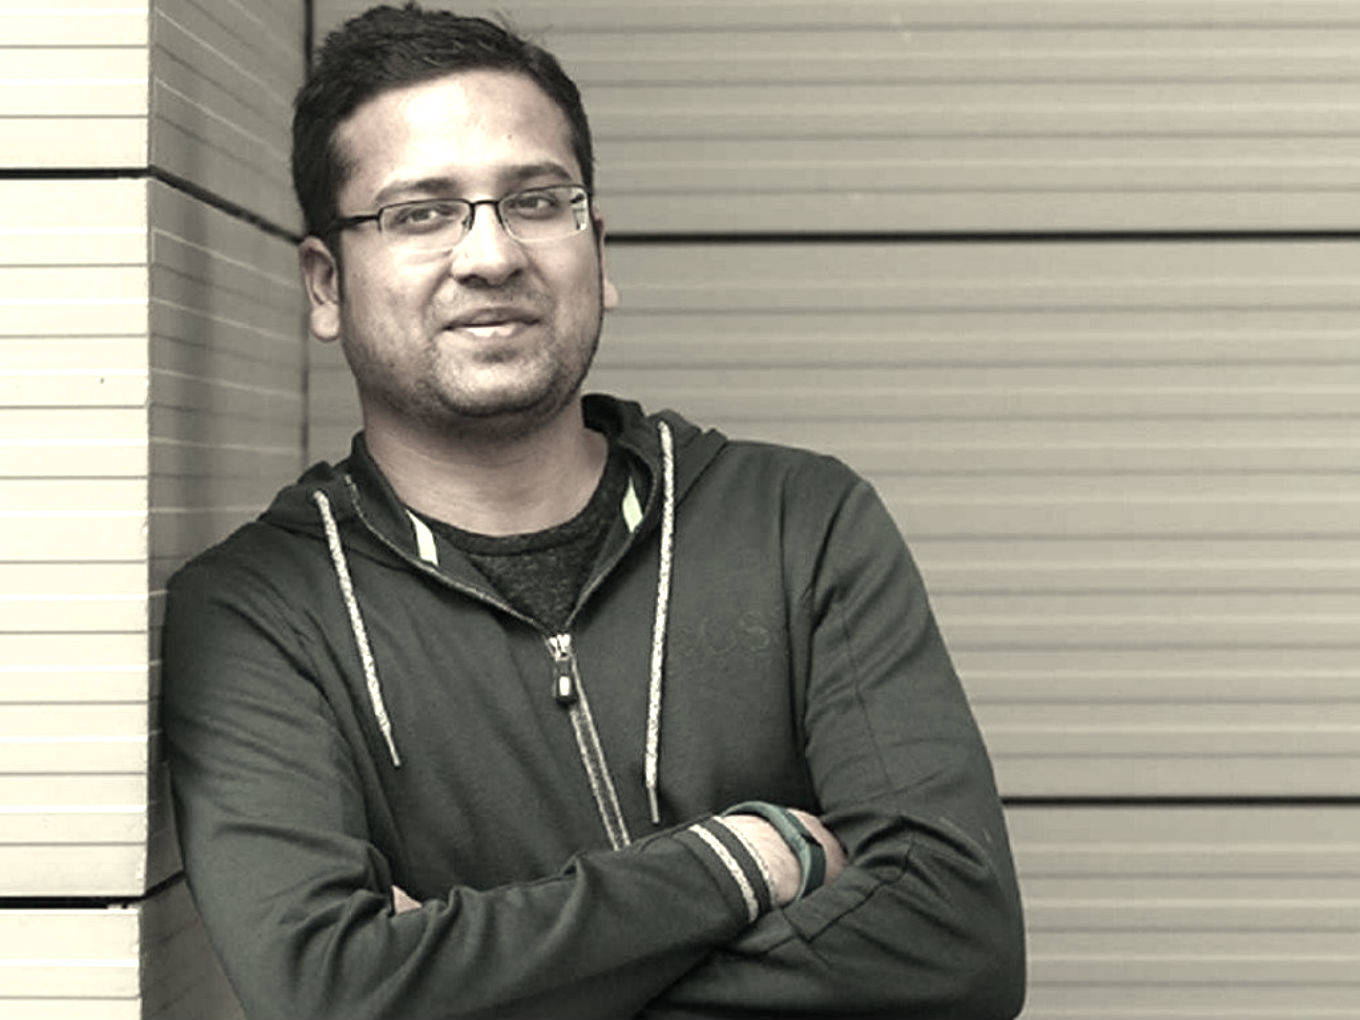 Interesting facts about Binny Bansal, the co-founder and former ceo of Flipkart to inspire you - Business Insider India